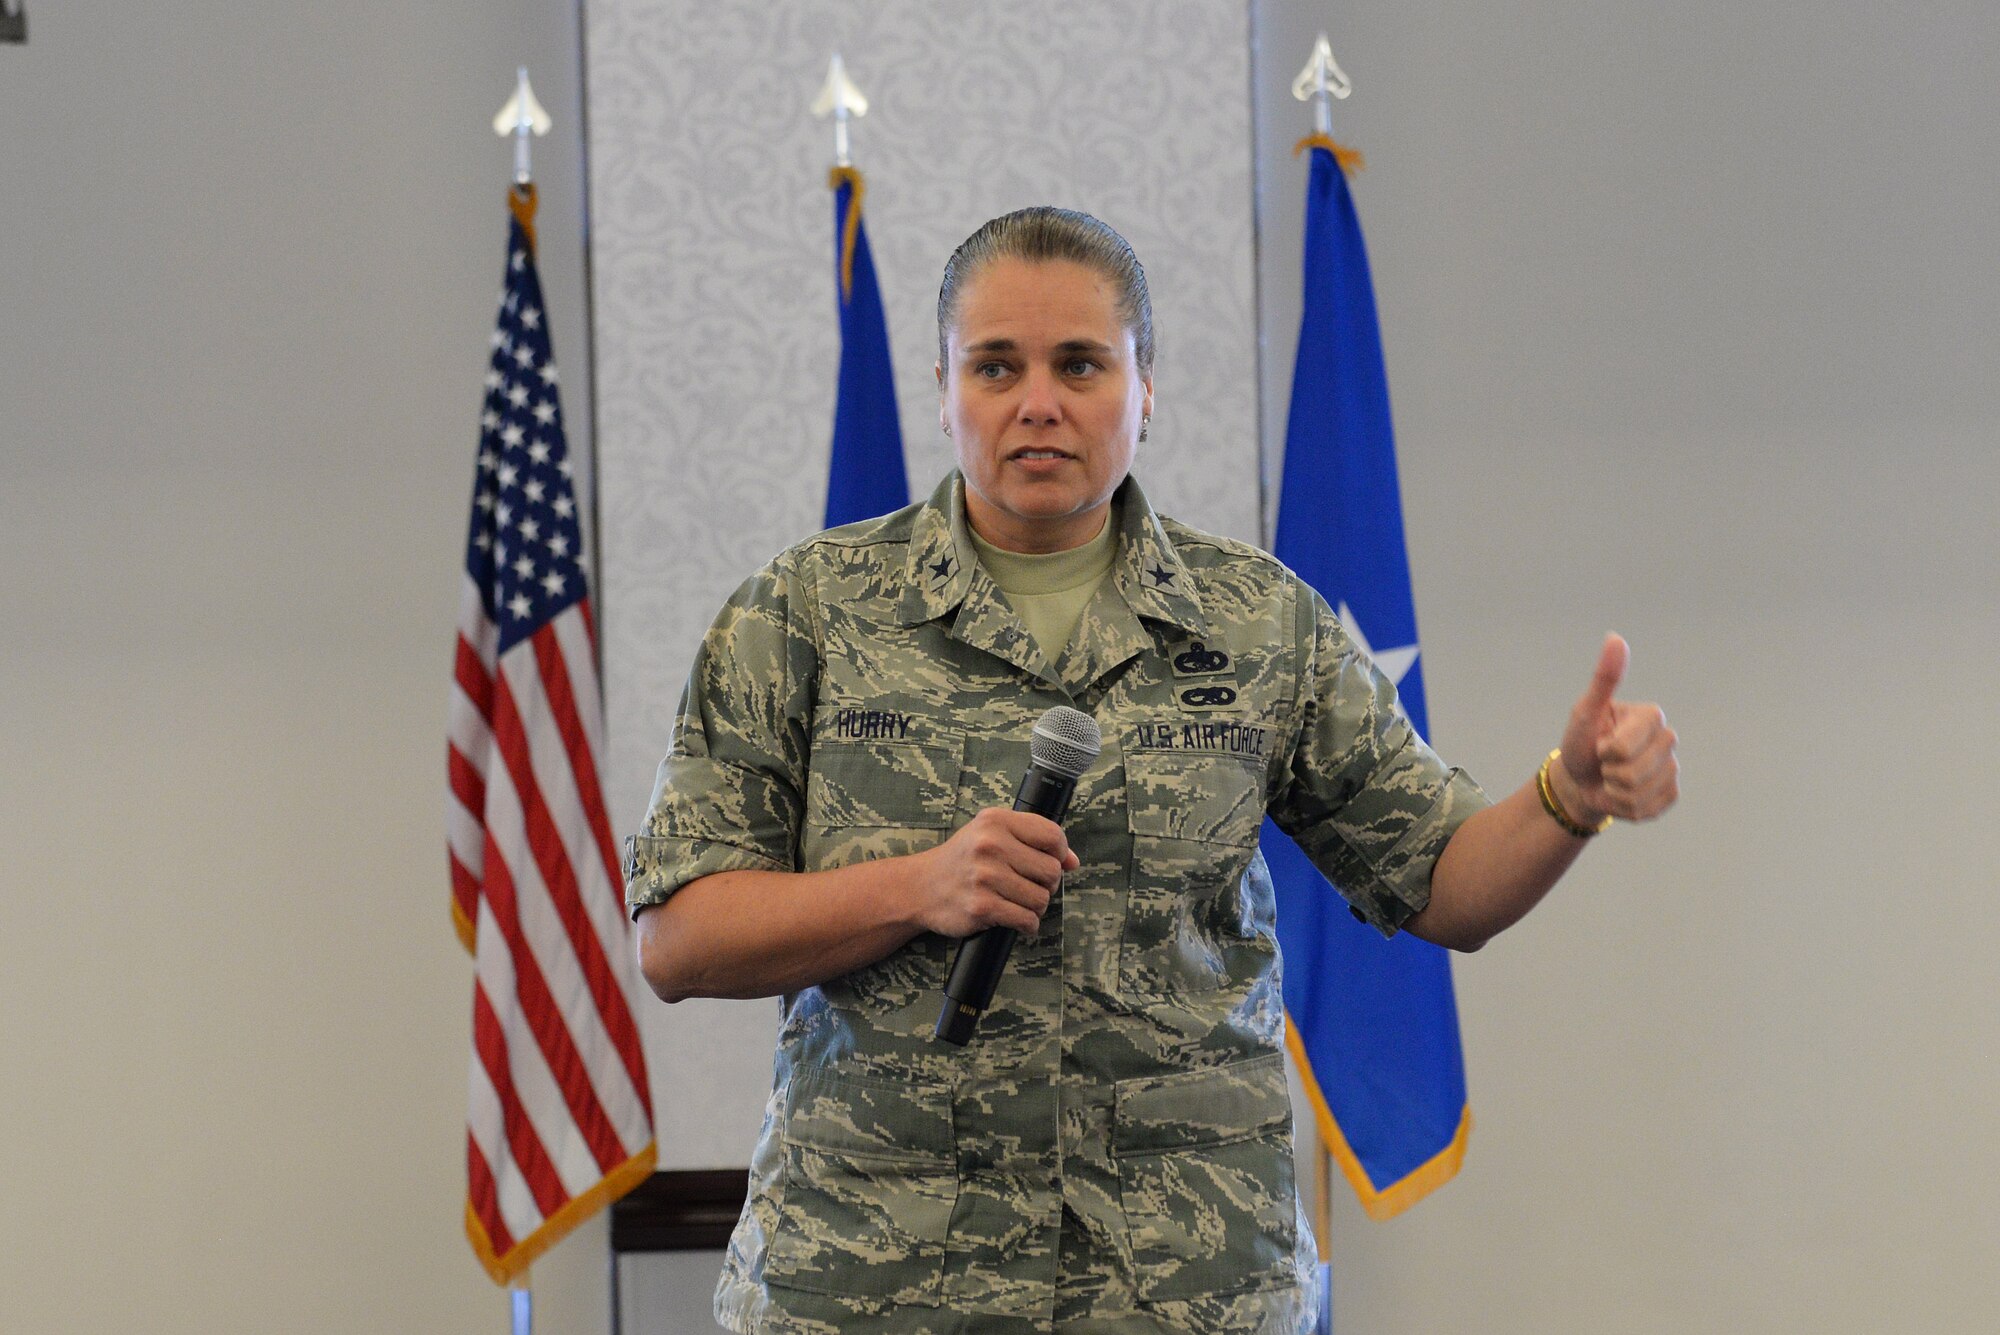 Brig. Gen. Linda Hurry, Air Force Installation and Mission Support Center Expeditionary Support director talks about the organization she works for and introduces her team during a logistics readiness summit at Scott Air Force Base March 22. Her and her team discussed readiness, field functional managers, support agreements and funding. (U.S. Air Force photo by Tech. Sgt. Maria Castle)